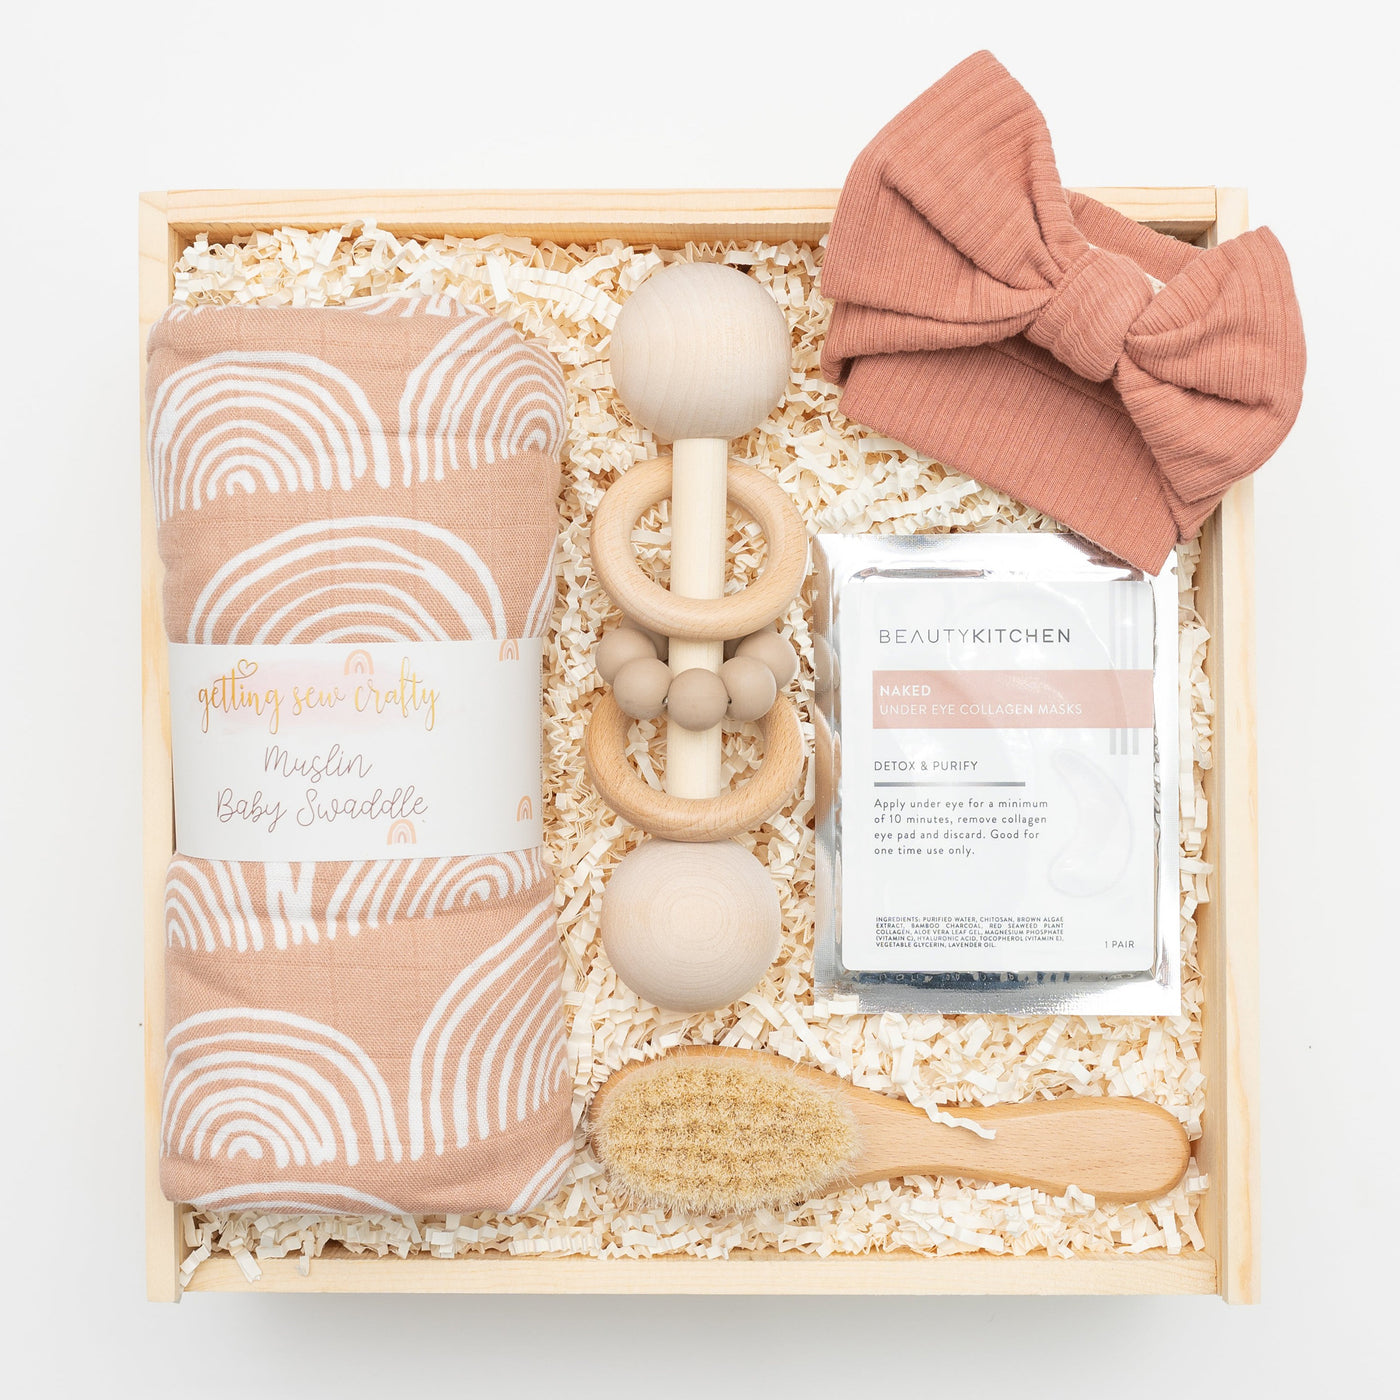 Celebrate the arrival of a new baby with this modern, elegant and practical gift box.